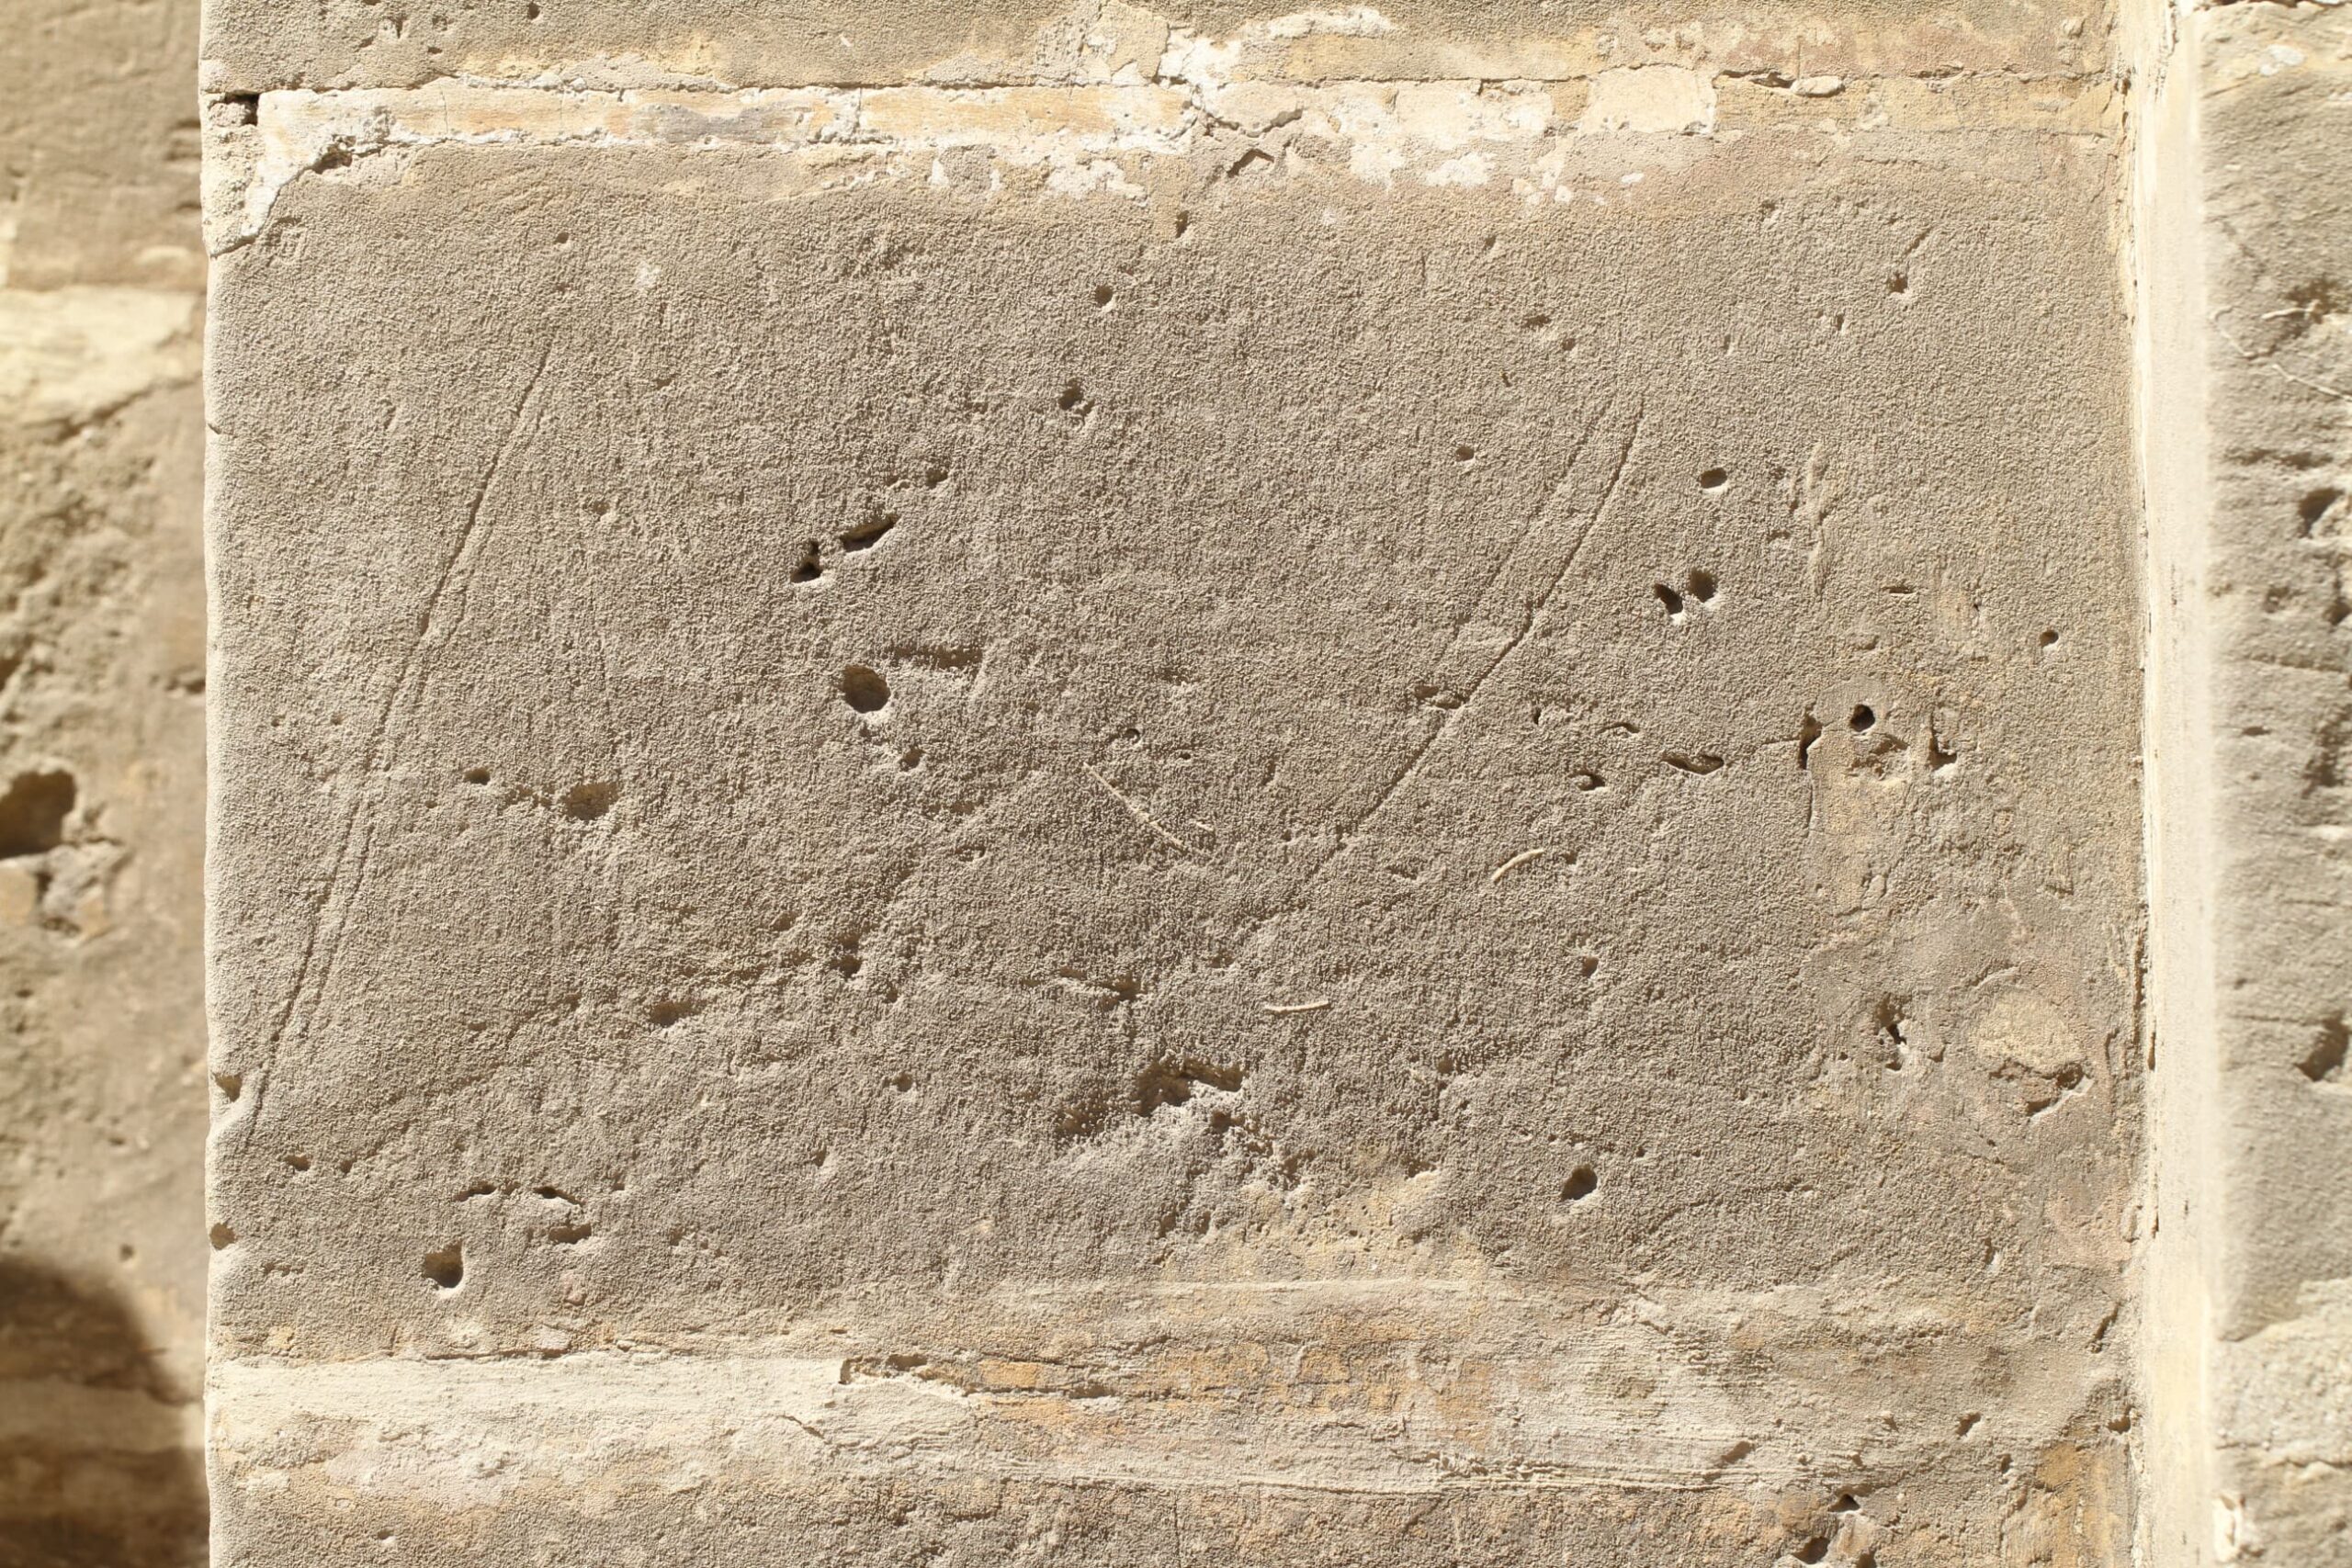 Etchings that bear evidence of a ship graffito that has now eroded away from sight.